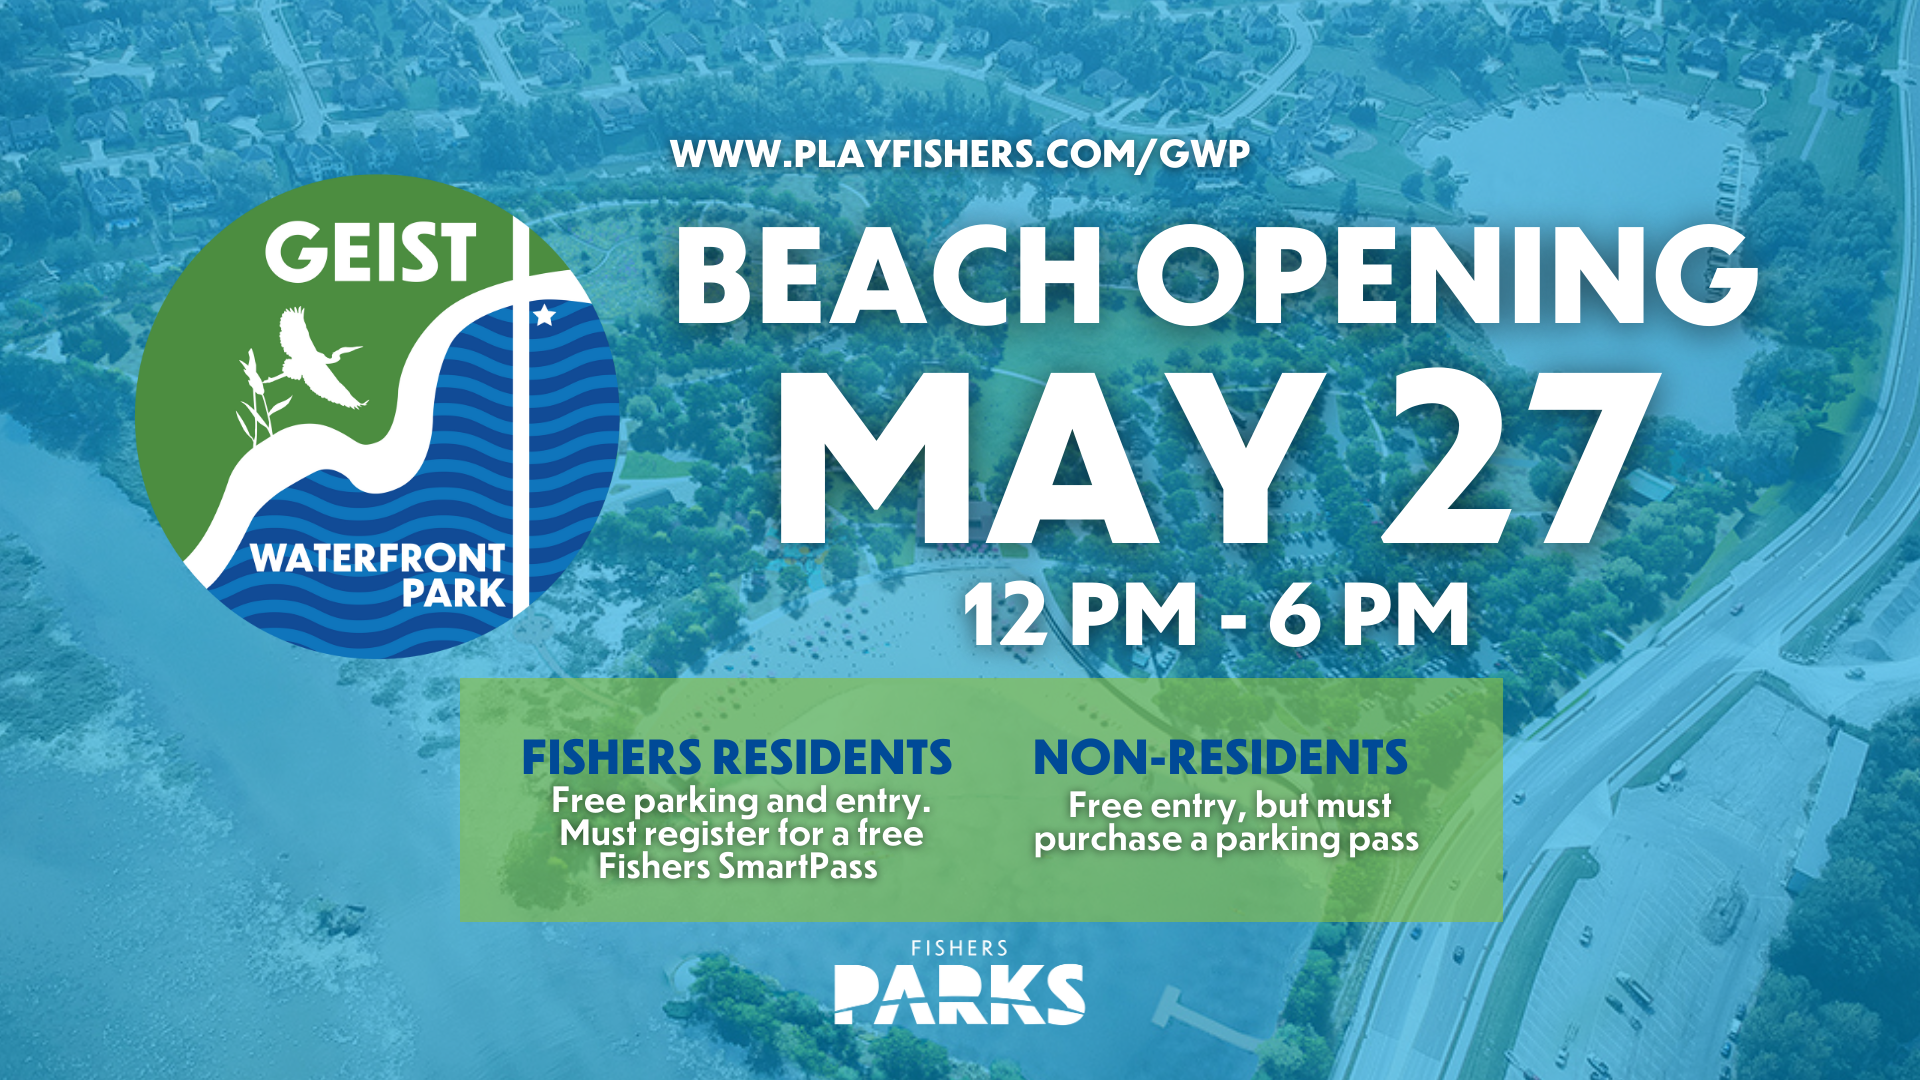 Geist Waterfront Park www.playfishers.com/gwp Beach Opening May 27 12 pm - 6pm Fishers Residents Free parking and entry. Must register for a free fishers smart pass. Non-residents free entry, but must purchase a parking pass.